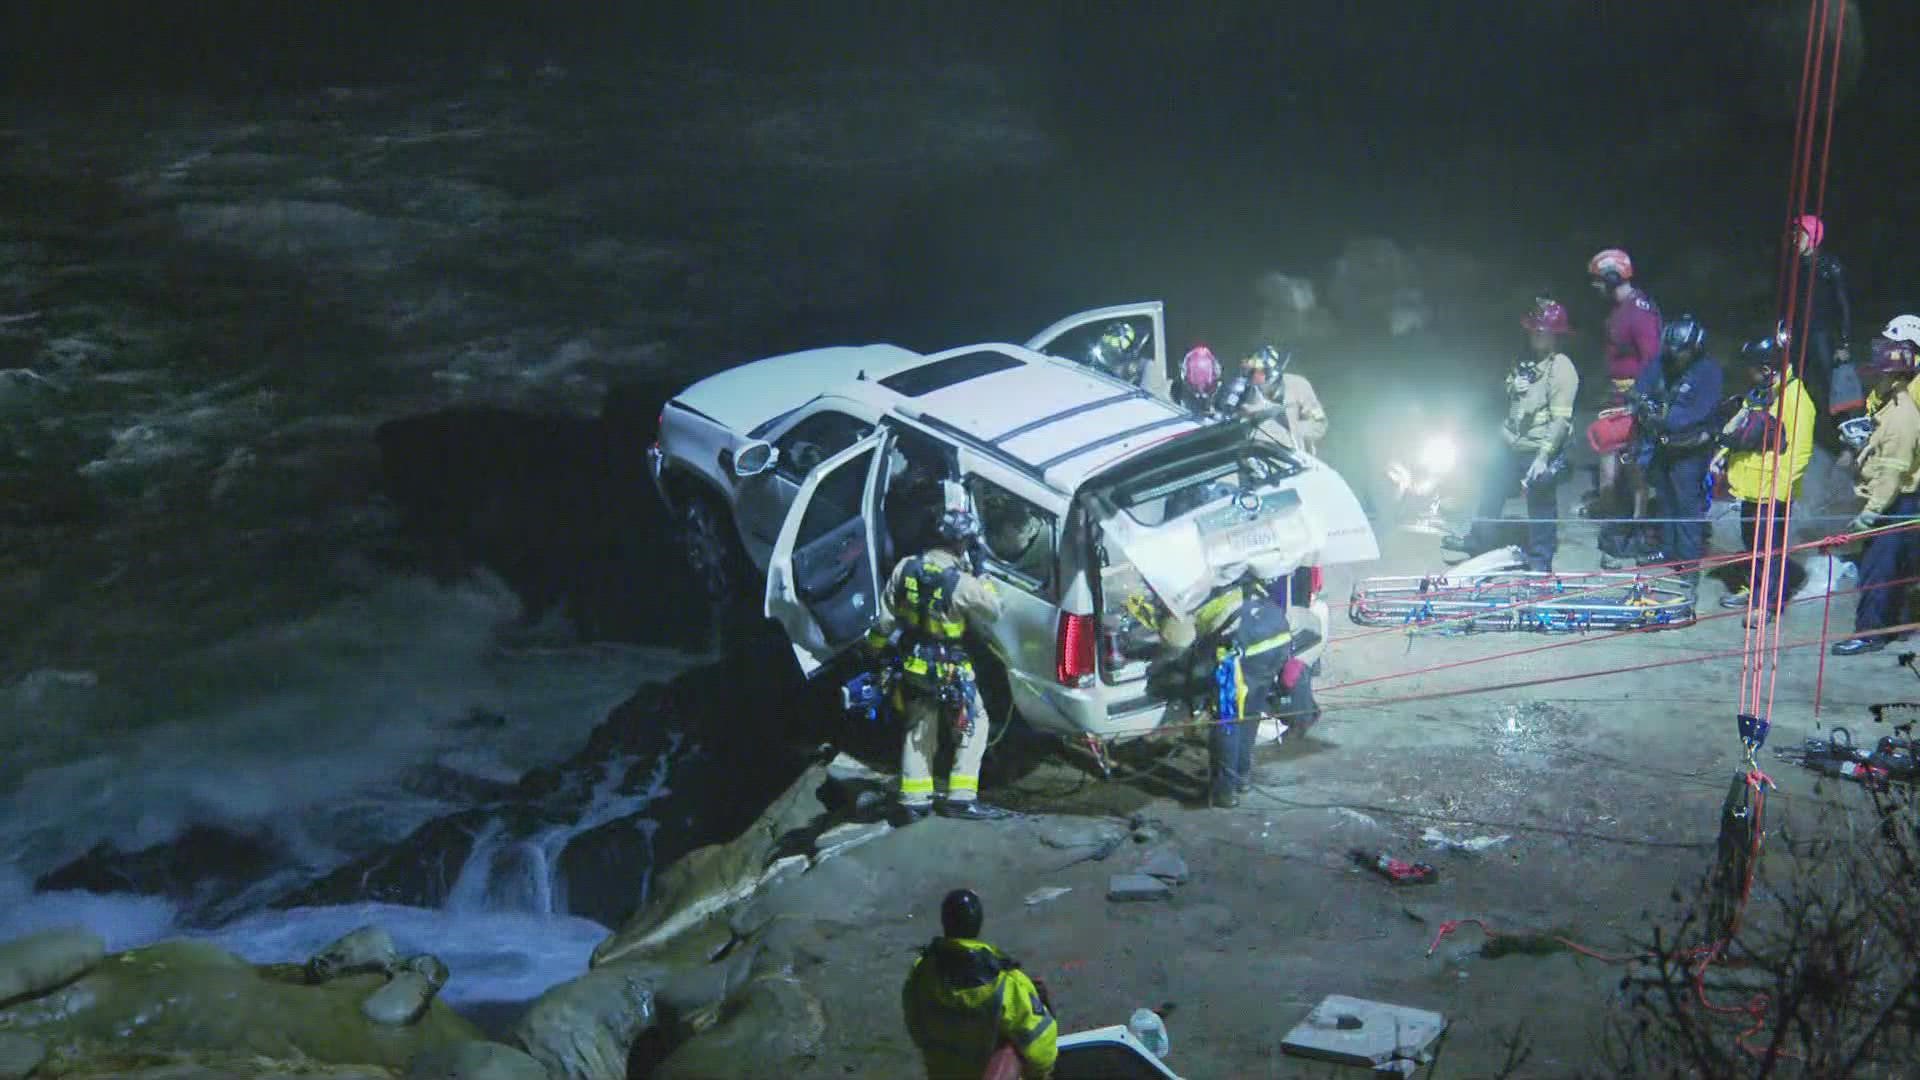 When first responders arrived on the scene, they discovered a white Cadillac Escalade on the rocks of La Jolla Cove, partially hanging over wind-whipped ocean waves.